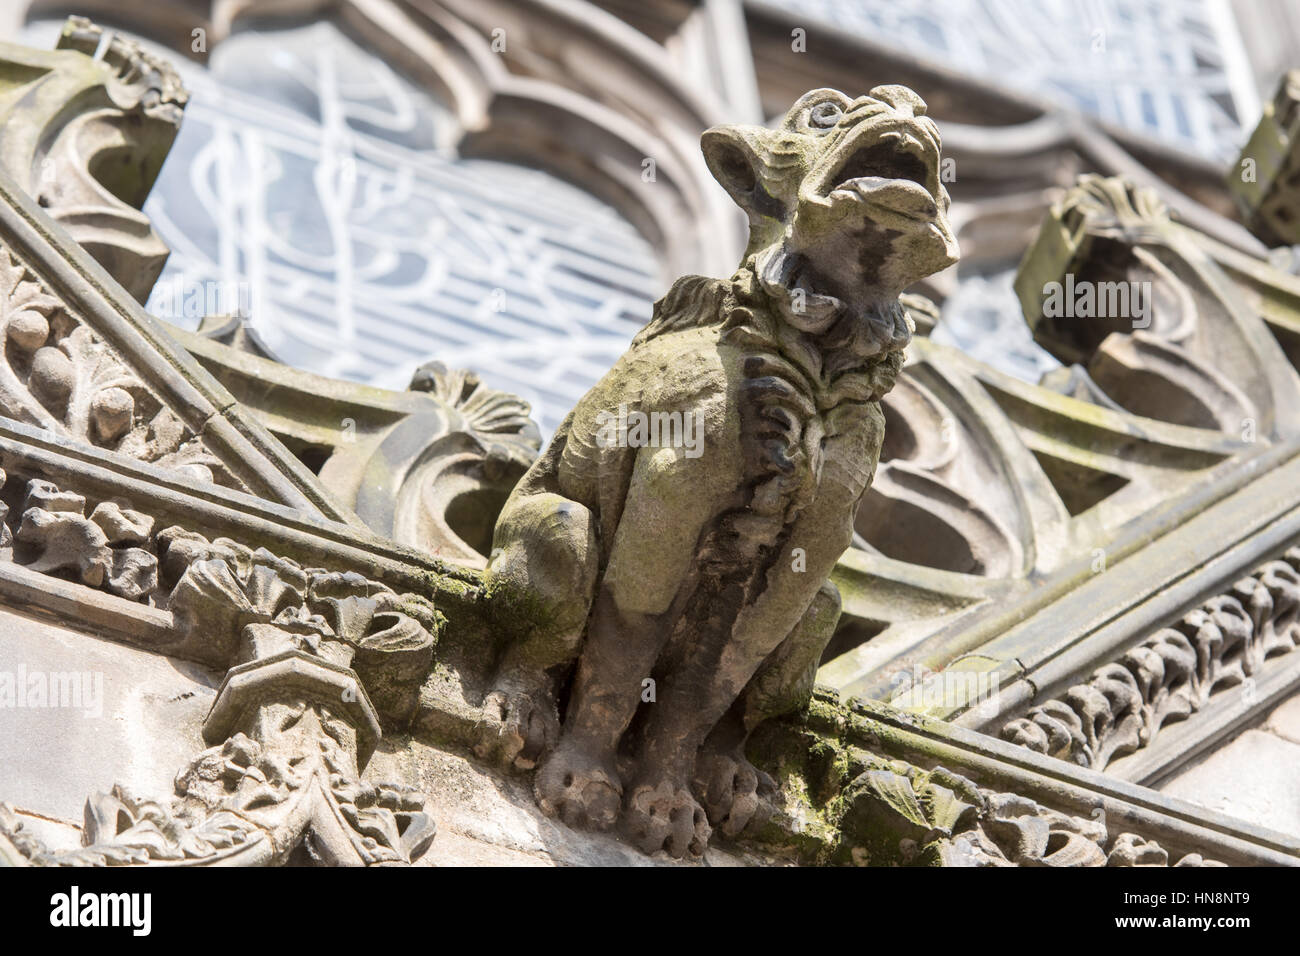 UK, Scotland, Edinburgh - A statue outside of St. Giles' Cathedral, also known as the High Kirk of Edinburgh, the principal place of worship of the Ch Stock Photo